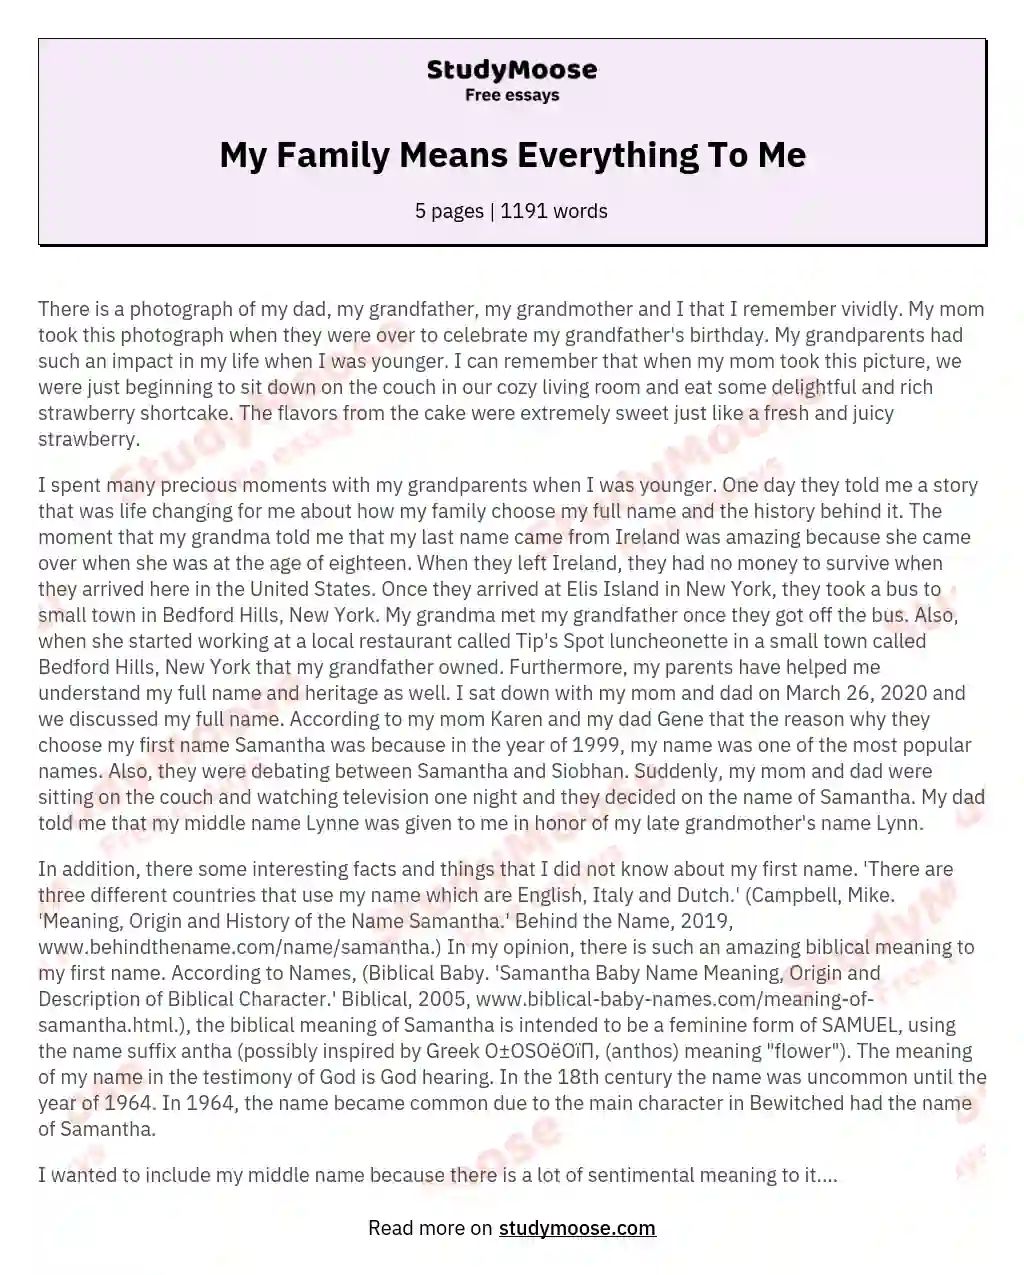 My Family Means Everything To Me essay